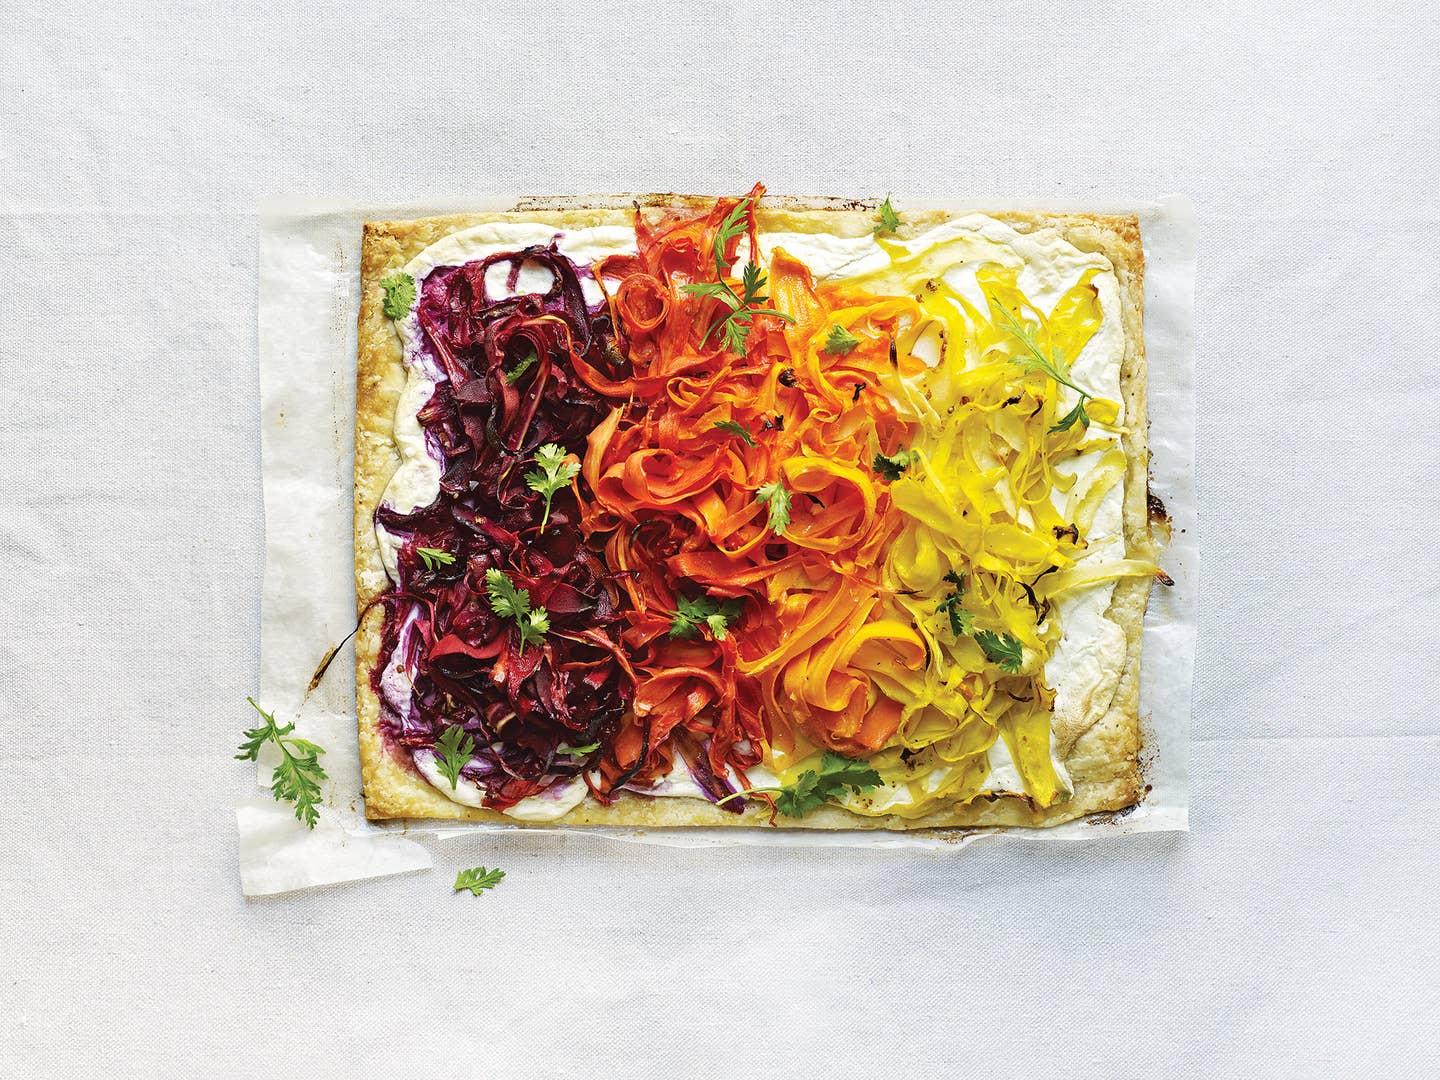 Beat Dark Cold Days With This Bright Carrot Tart